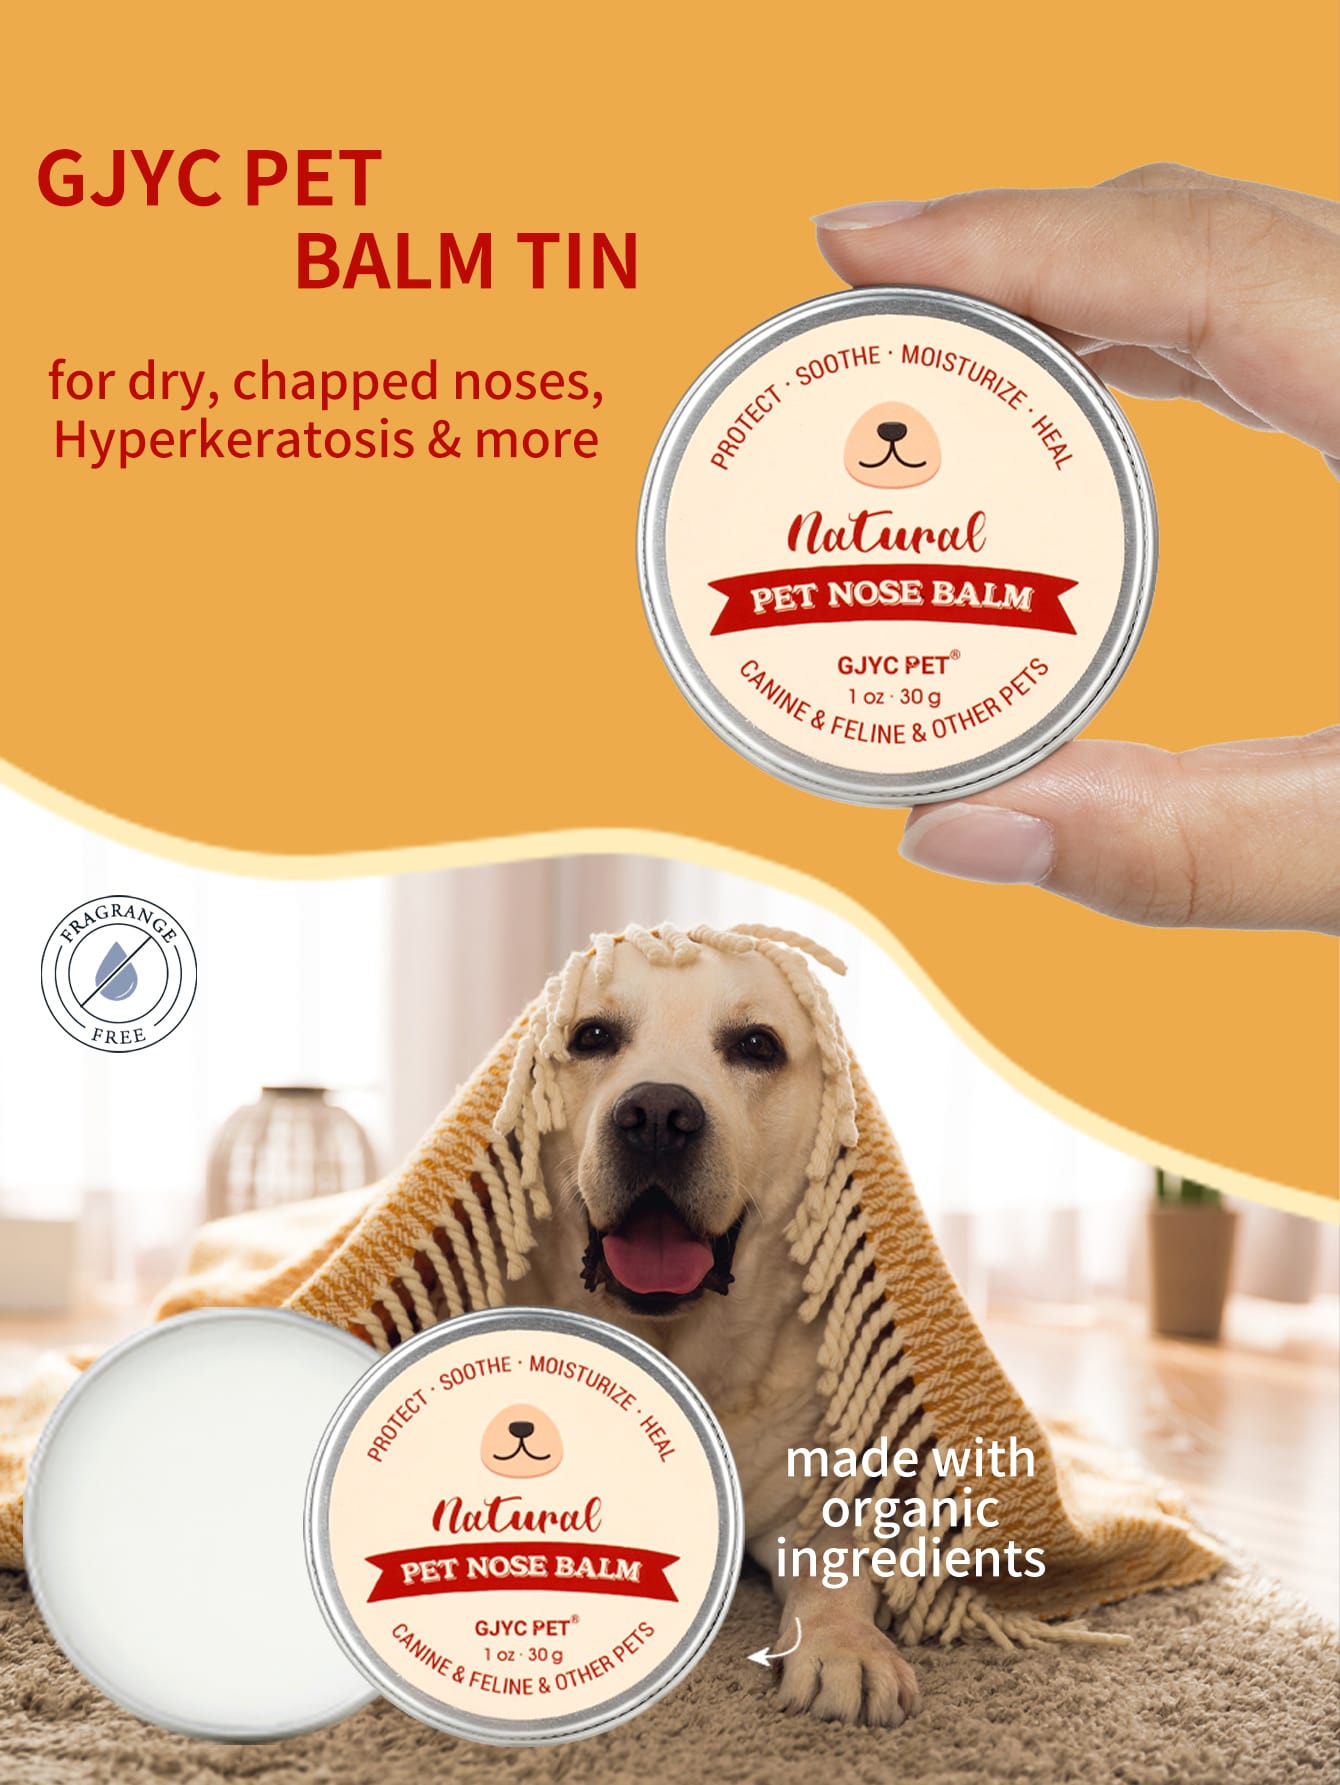 Pet Nose Moisturizing Balm 1 Oz: Prevents Dry Noses In Dogs And Cats (including French Bulldogs), Repairs Dryness And Cracks, Deeply Moisturizes, Can Be Licked Safely